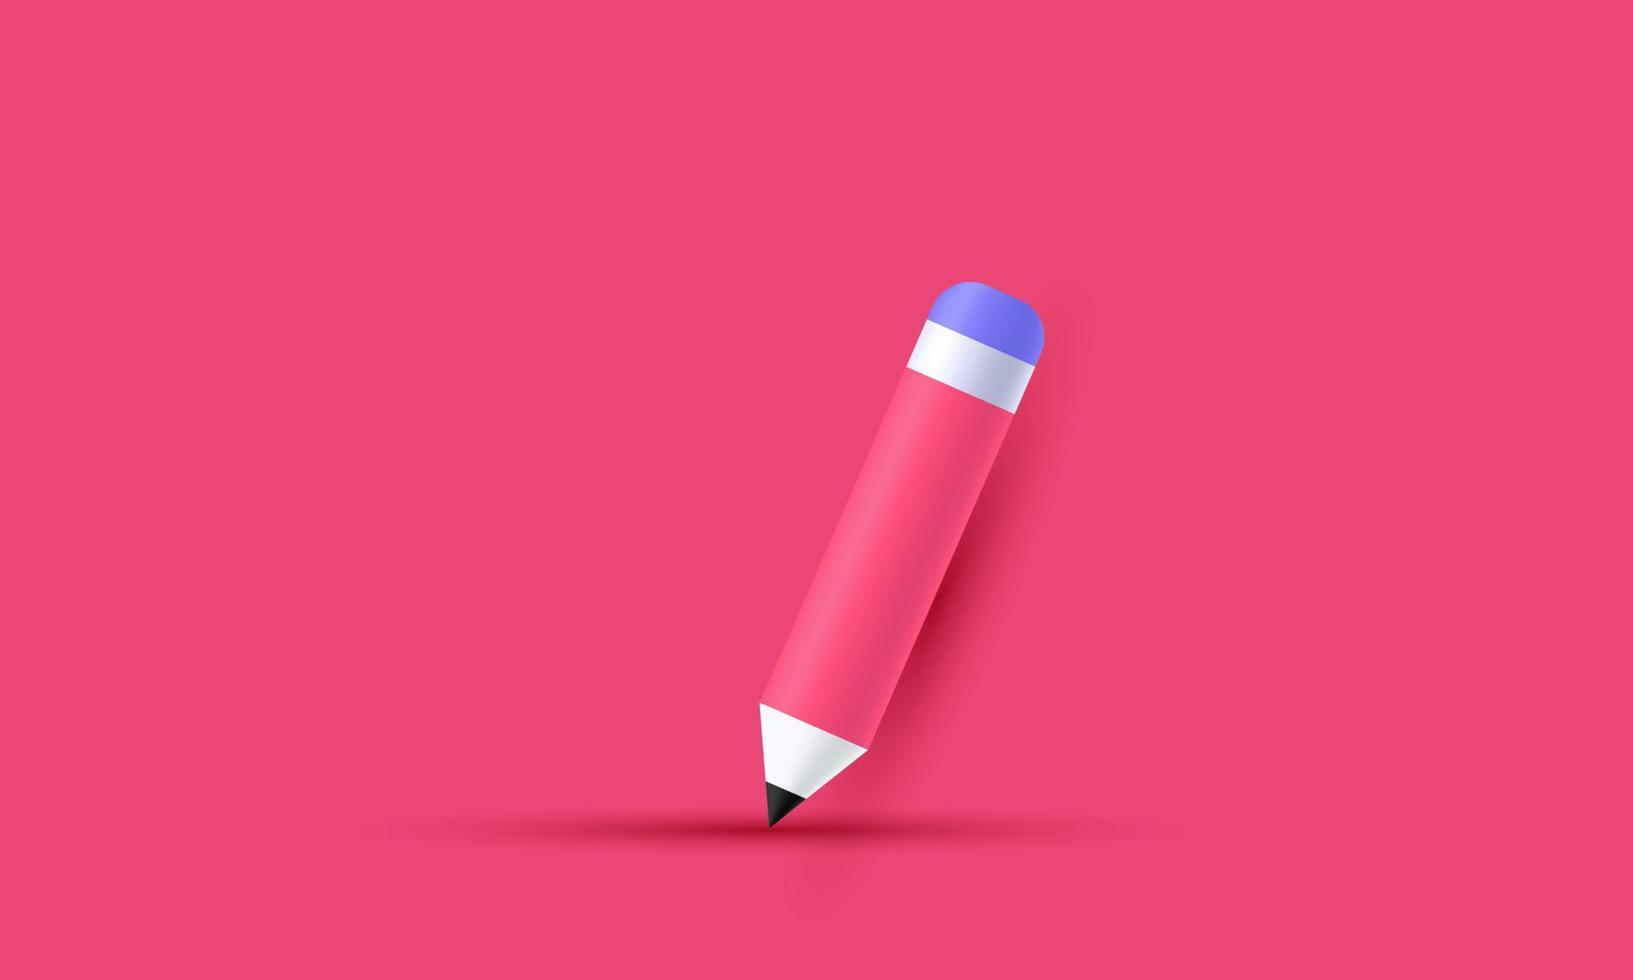 illustration realistic icon 3d pencil great design any purposes isolated on background vector